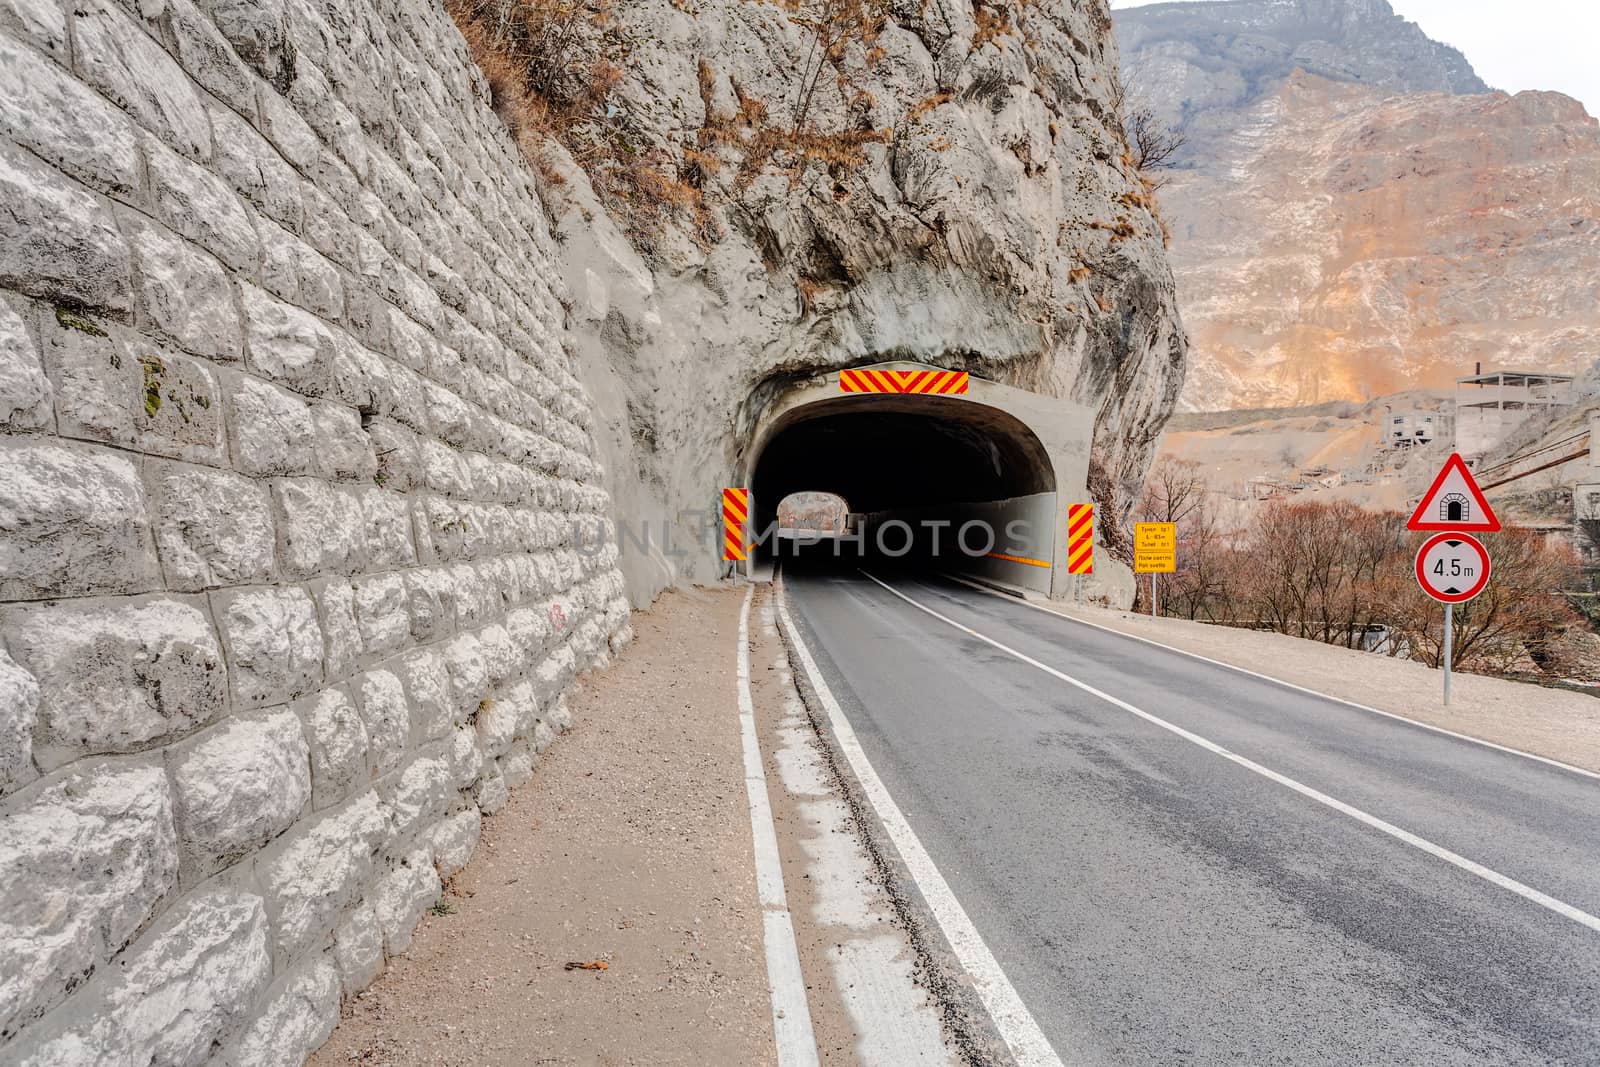 Tunnel on the road in the canyon by vladimirnenezic